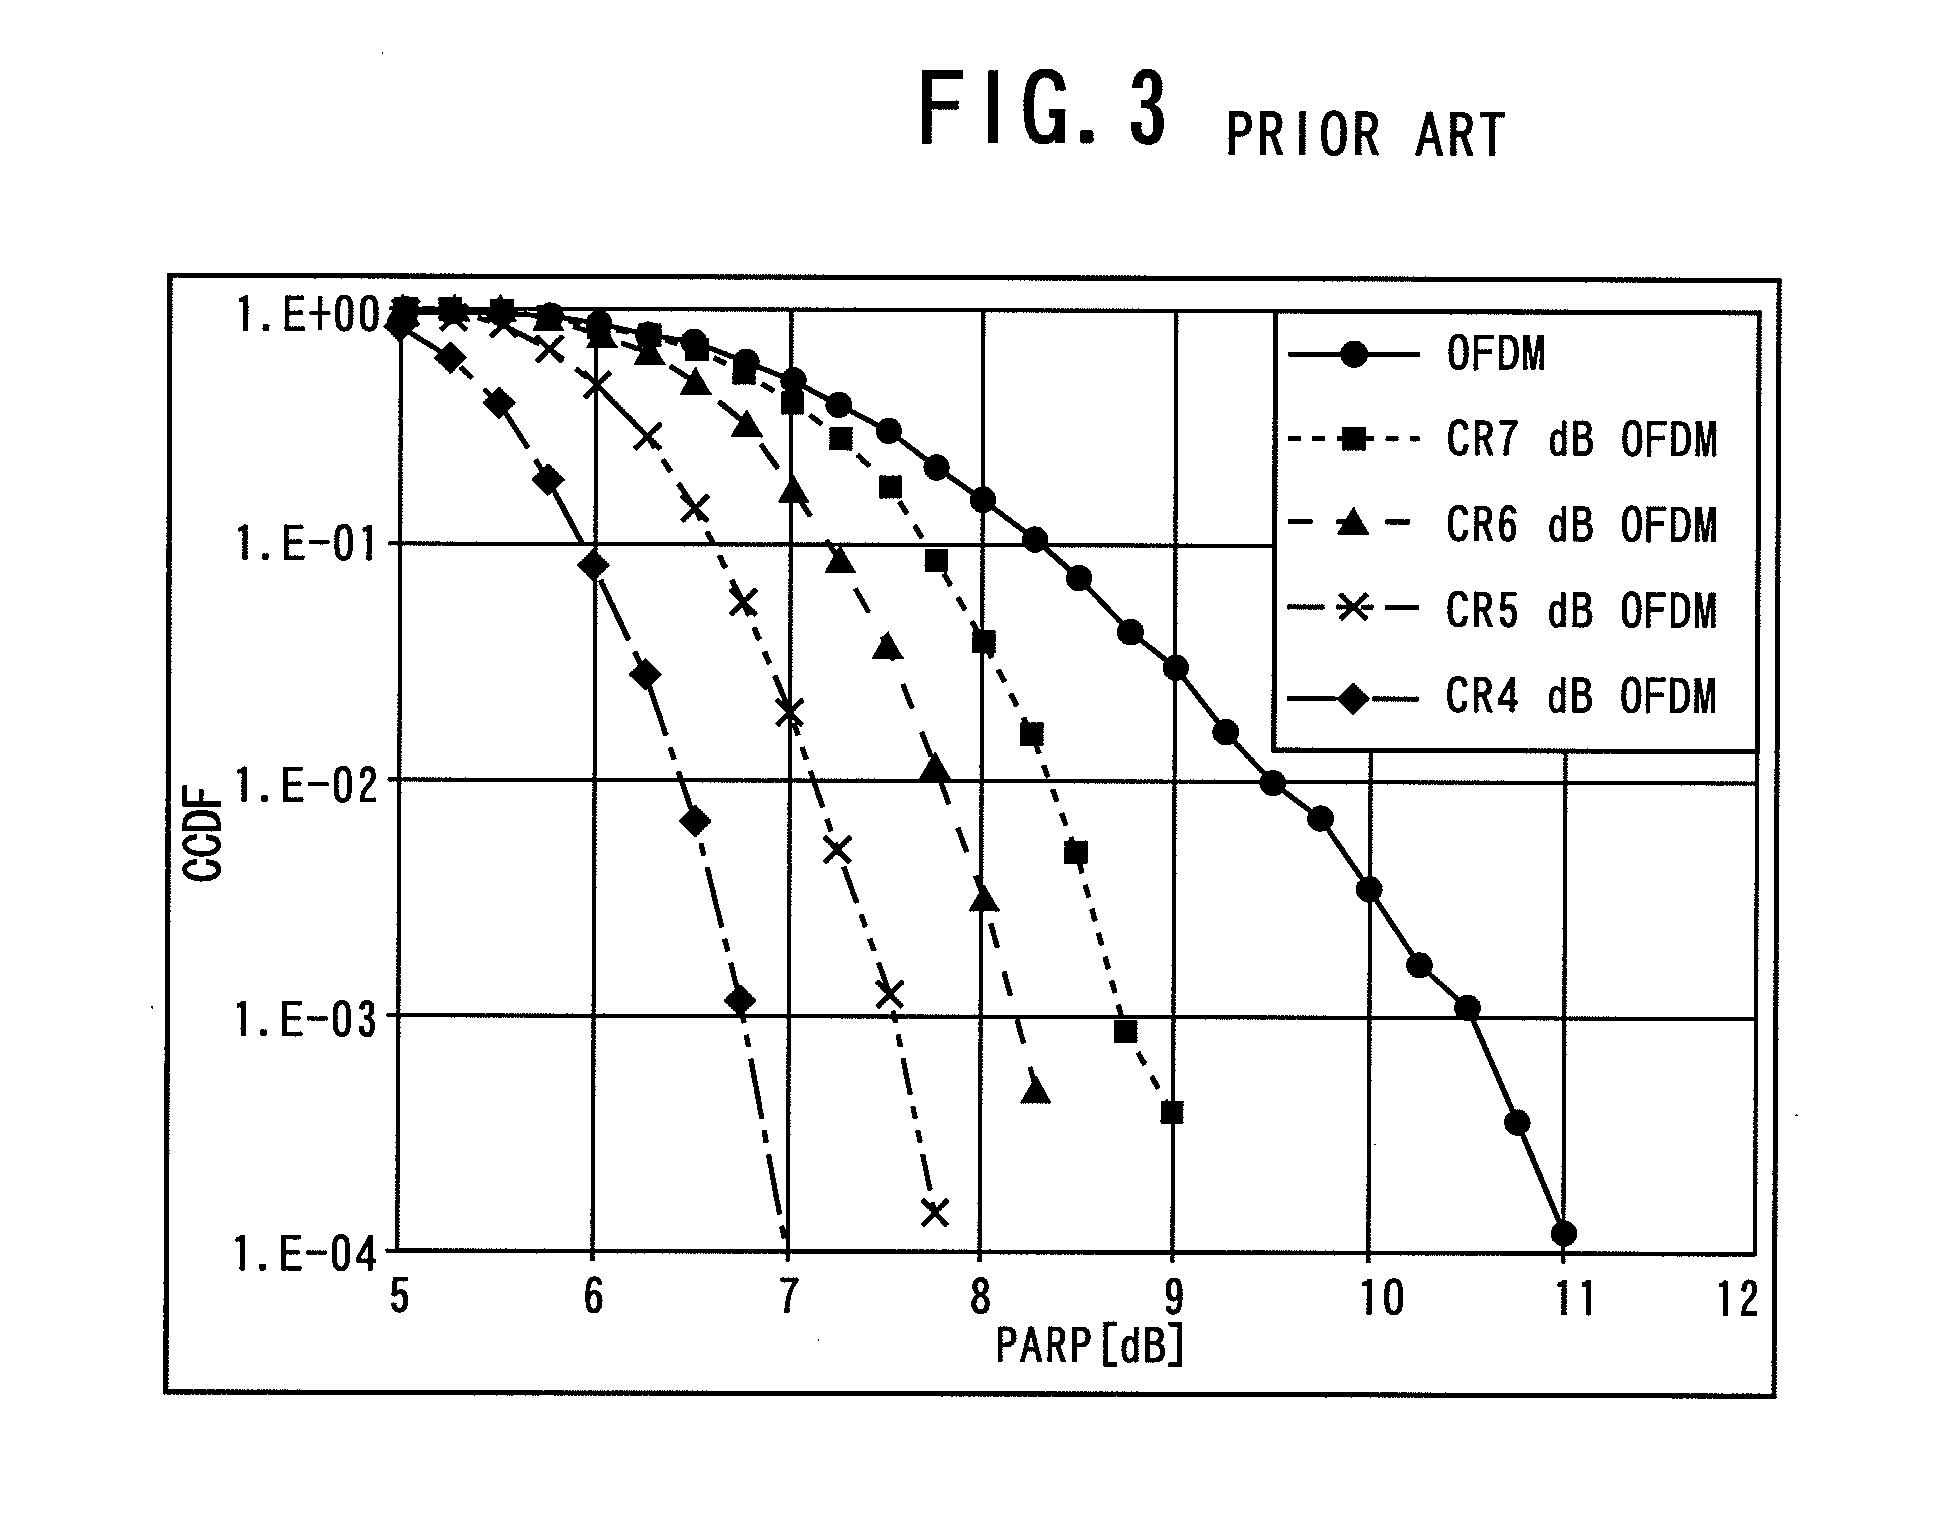 Transmitter for Suppressing Out-of-Band Power for a Signal